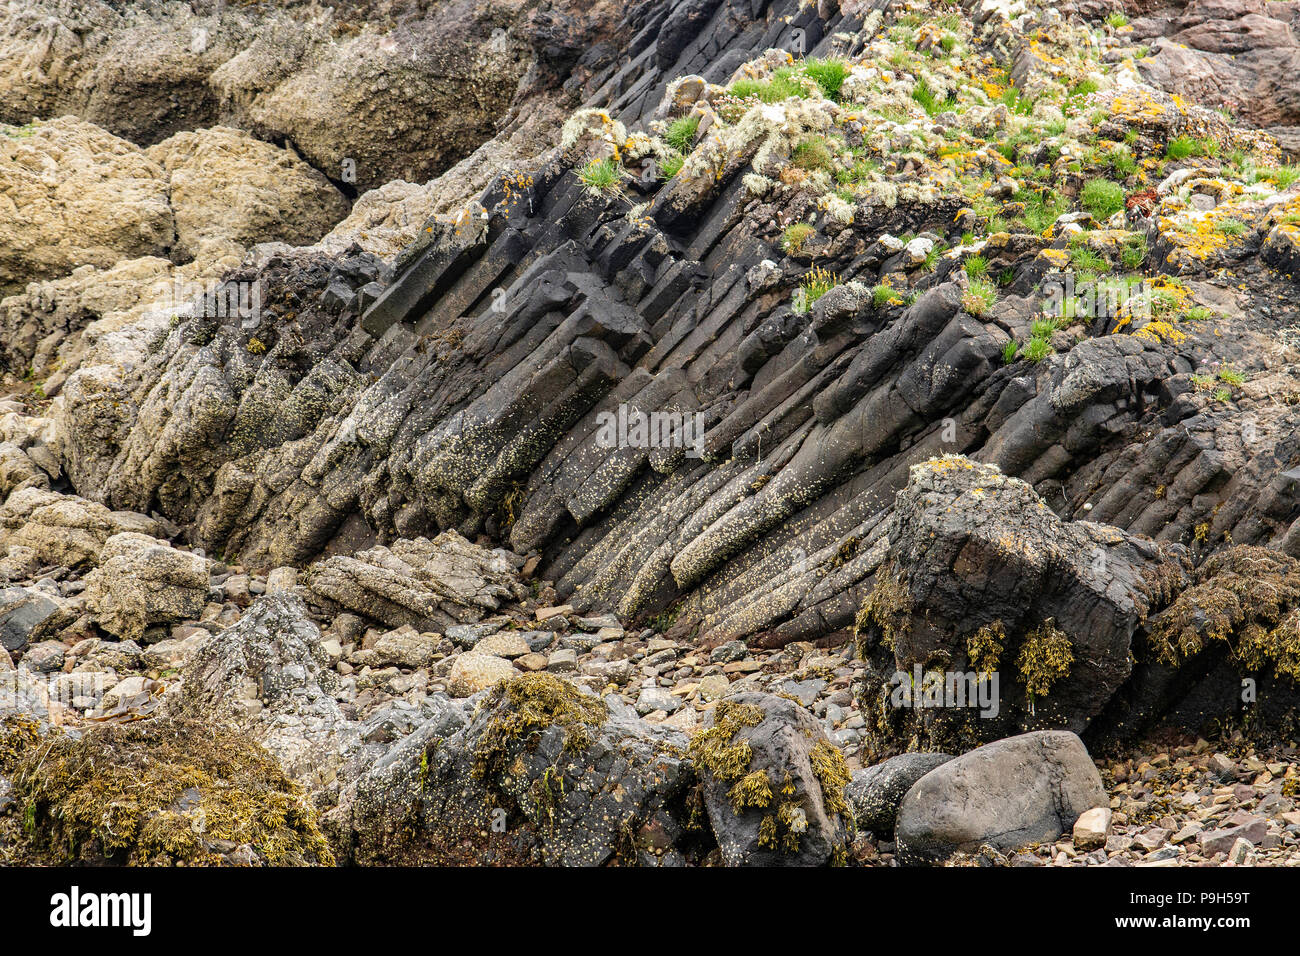 The Organ Pipes at Kilchattan on the Isle of Bute in Scotland are compressed and heated sandstone rather than basalt. Stock Photo